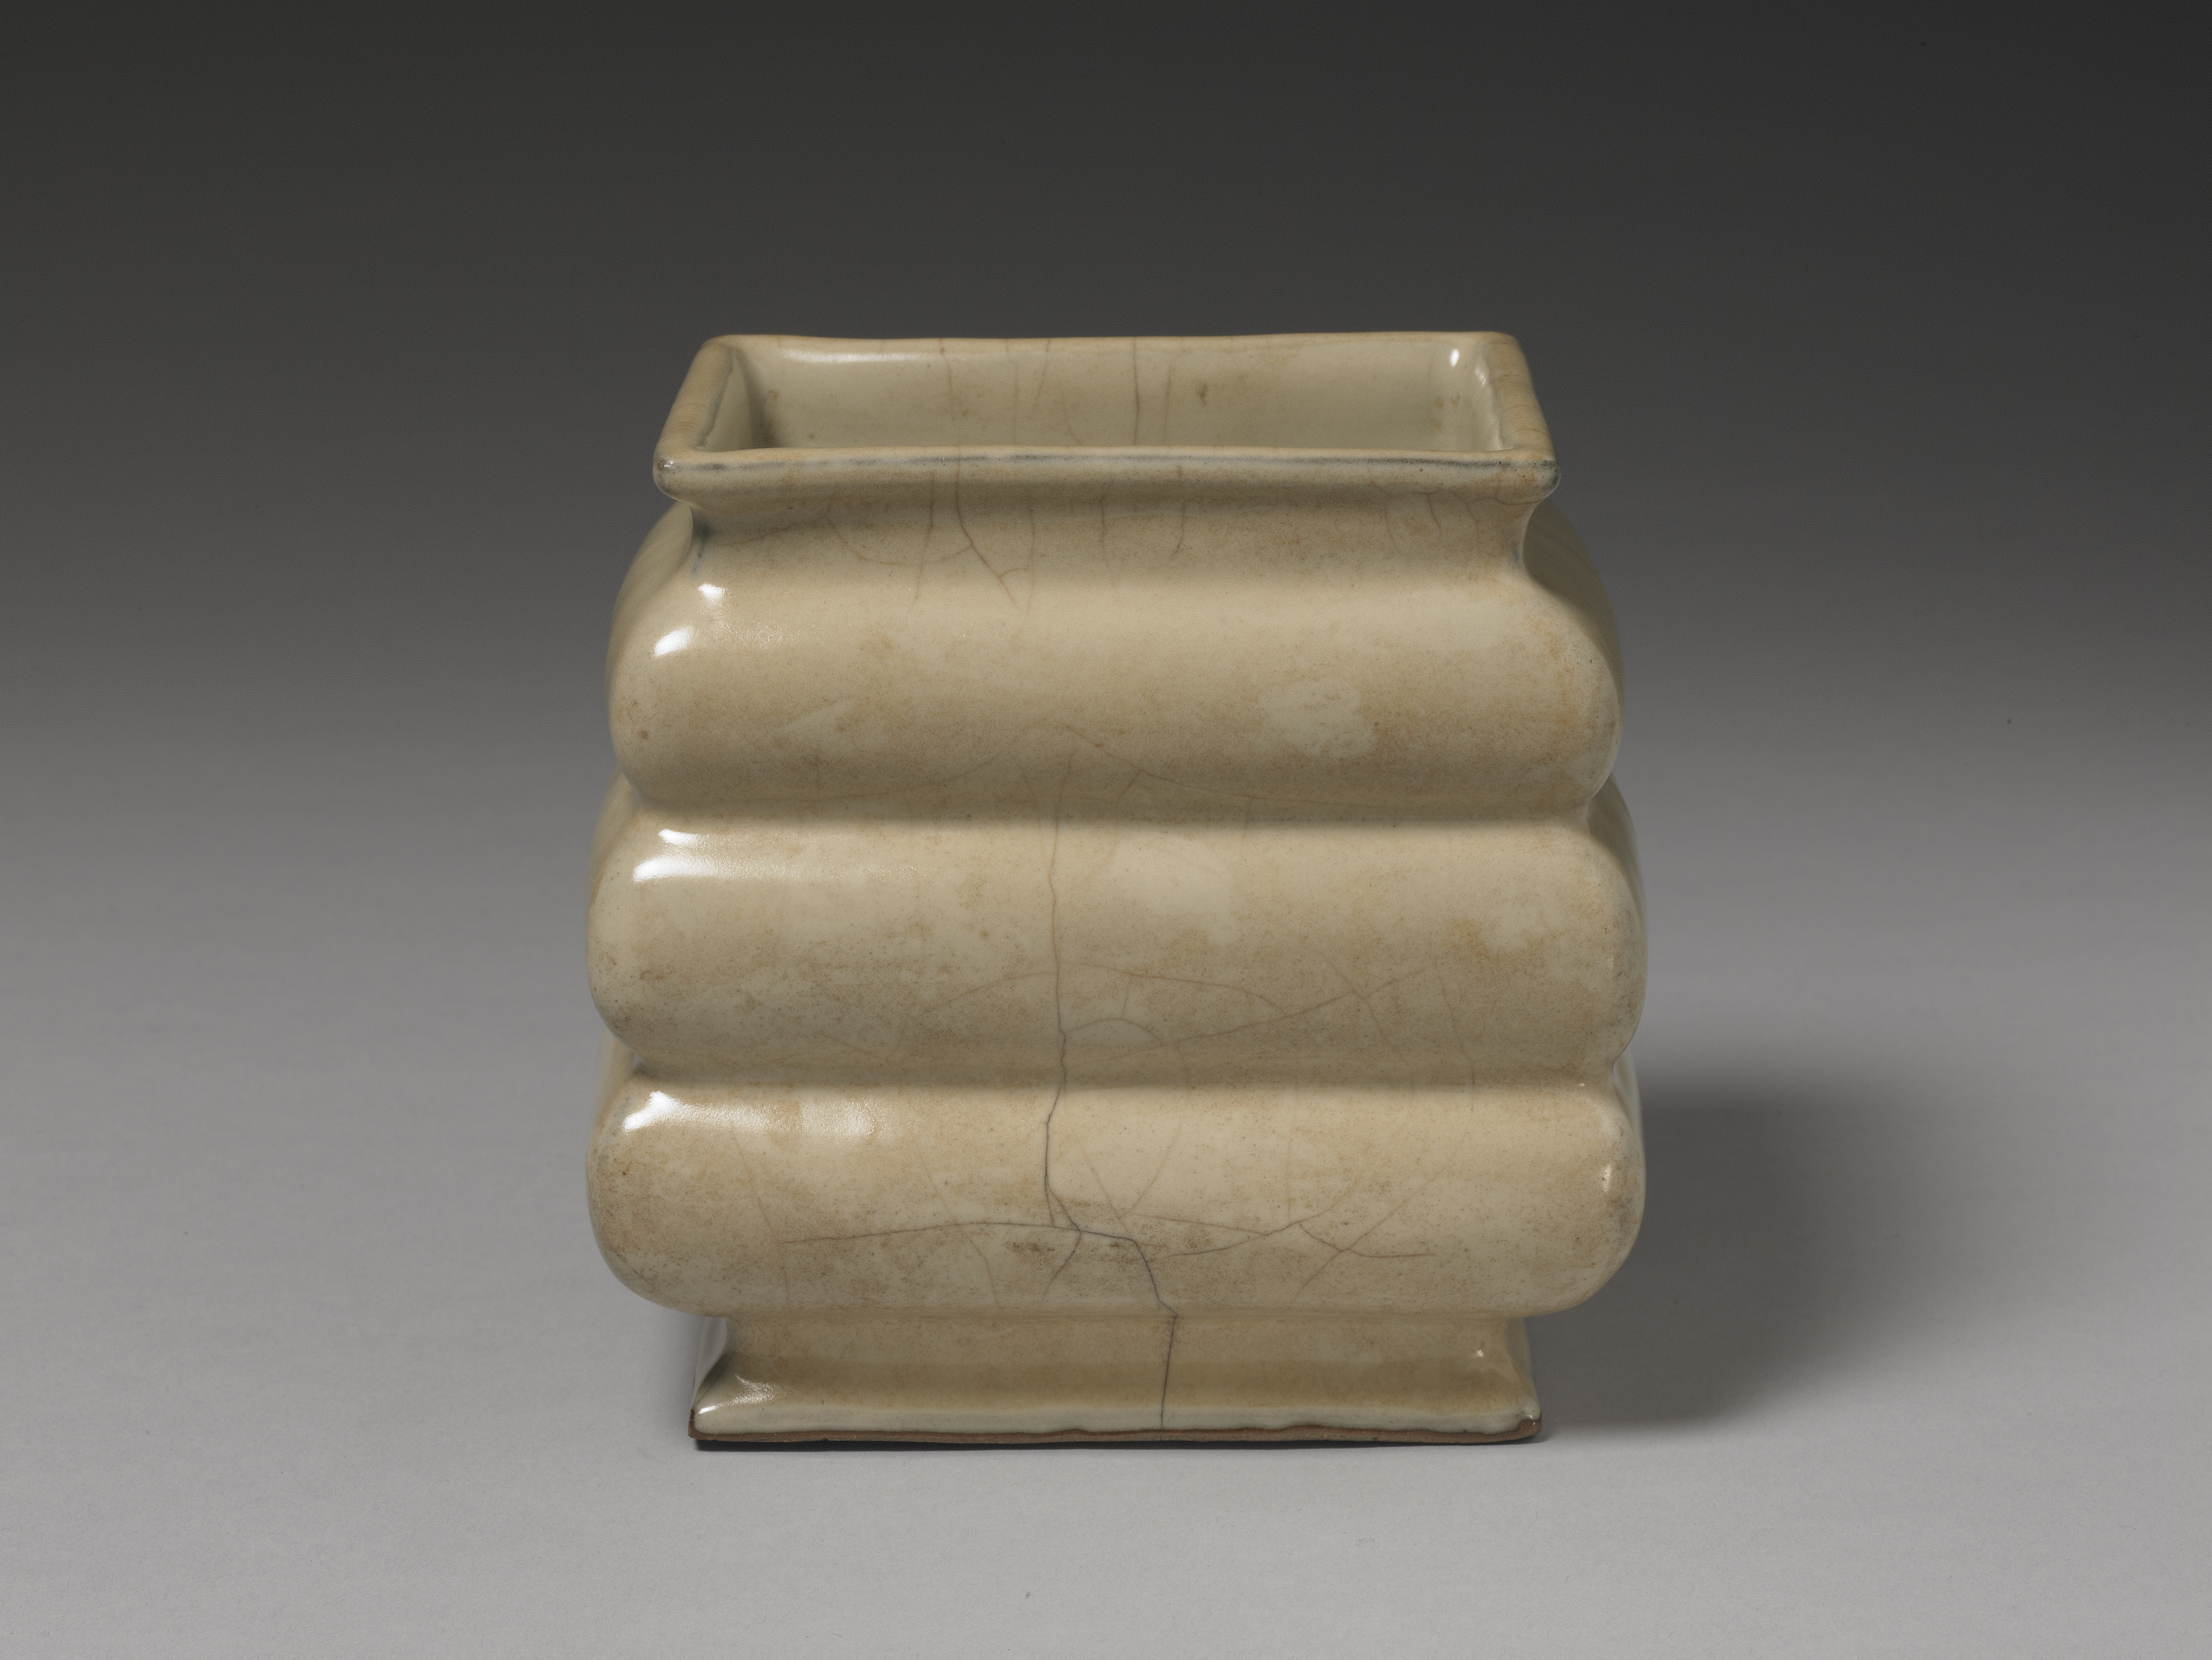 Stepped pot with cream-colored celadon glaze
Southern Song dynasty, 12th-13th century
